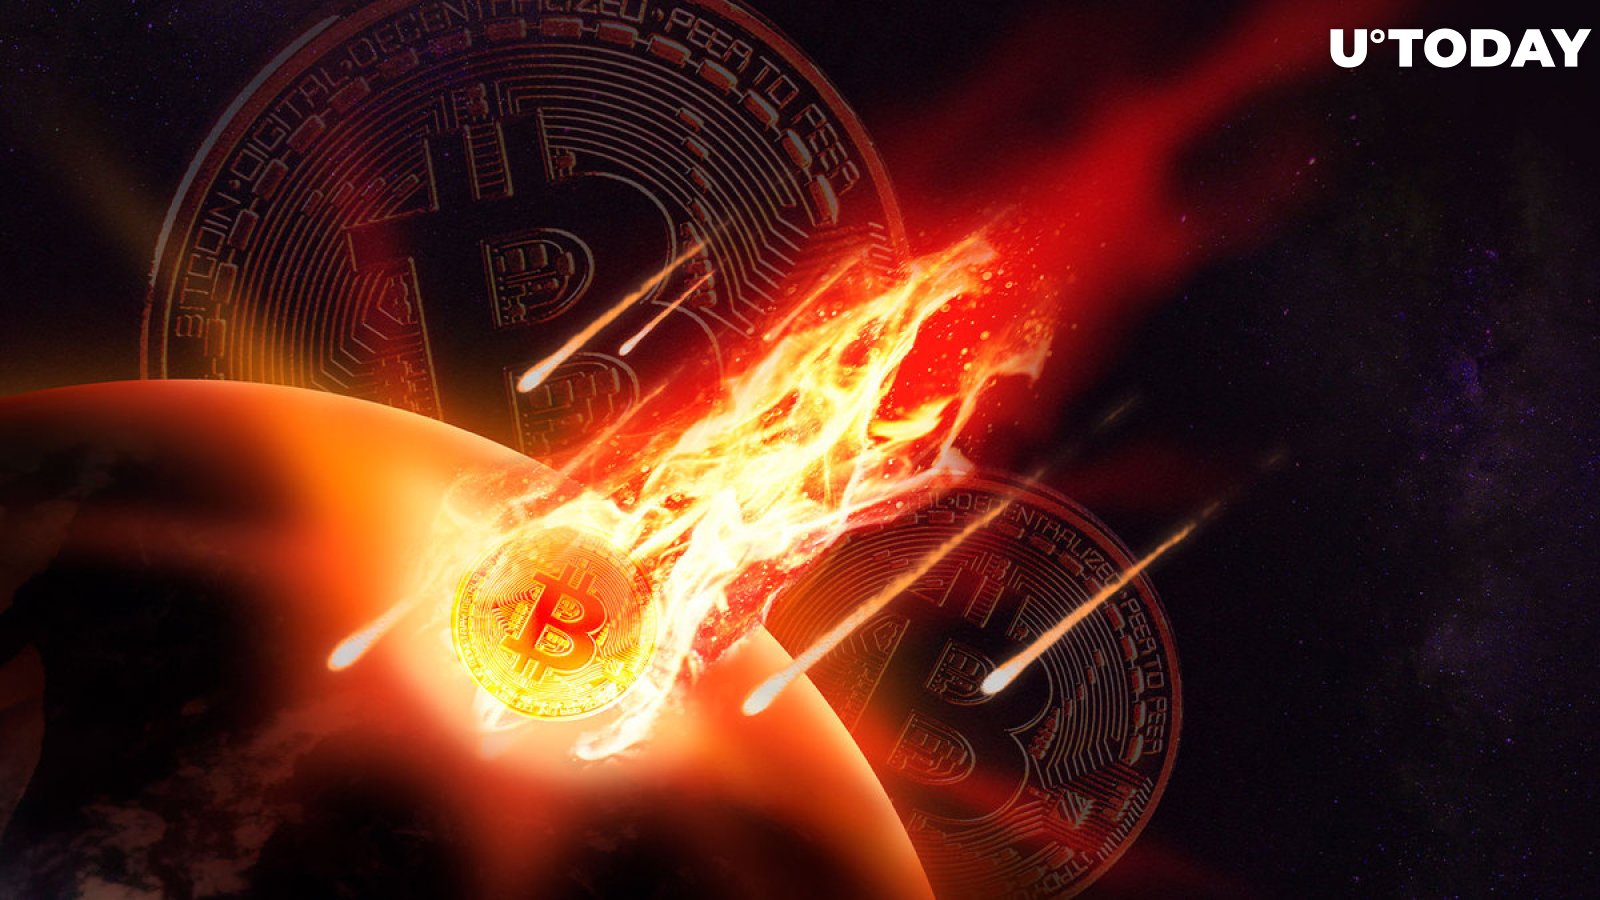 This Bitcoin Indicator Flashes Once Again; Will BTC Price Weakness Continue?